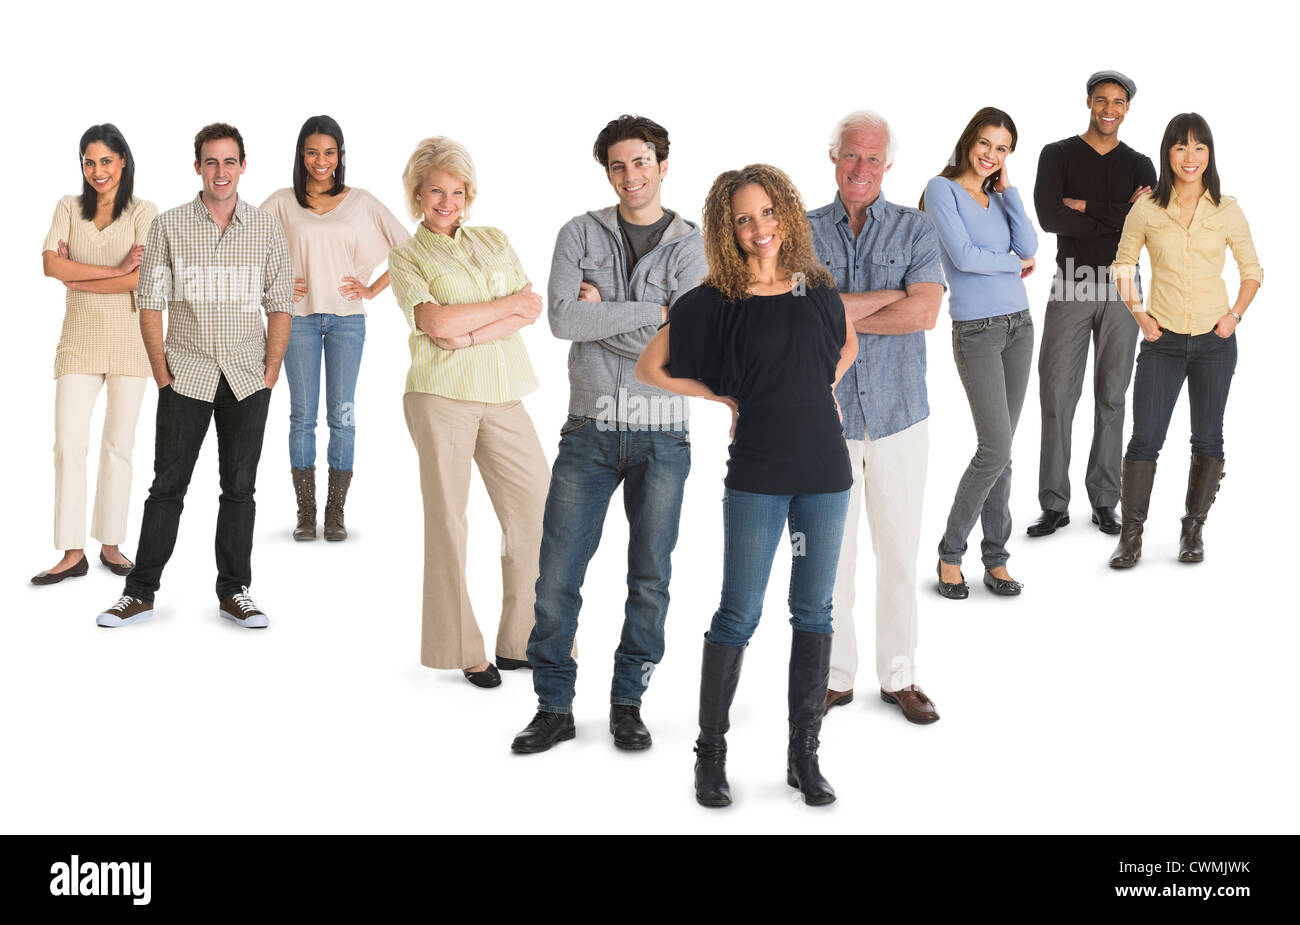 Multi-racial mixed race group of people posing together Stock Photo